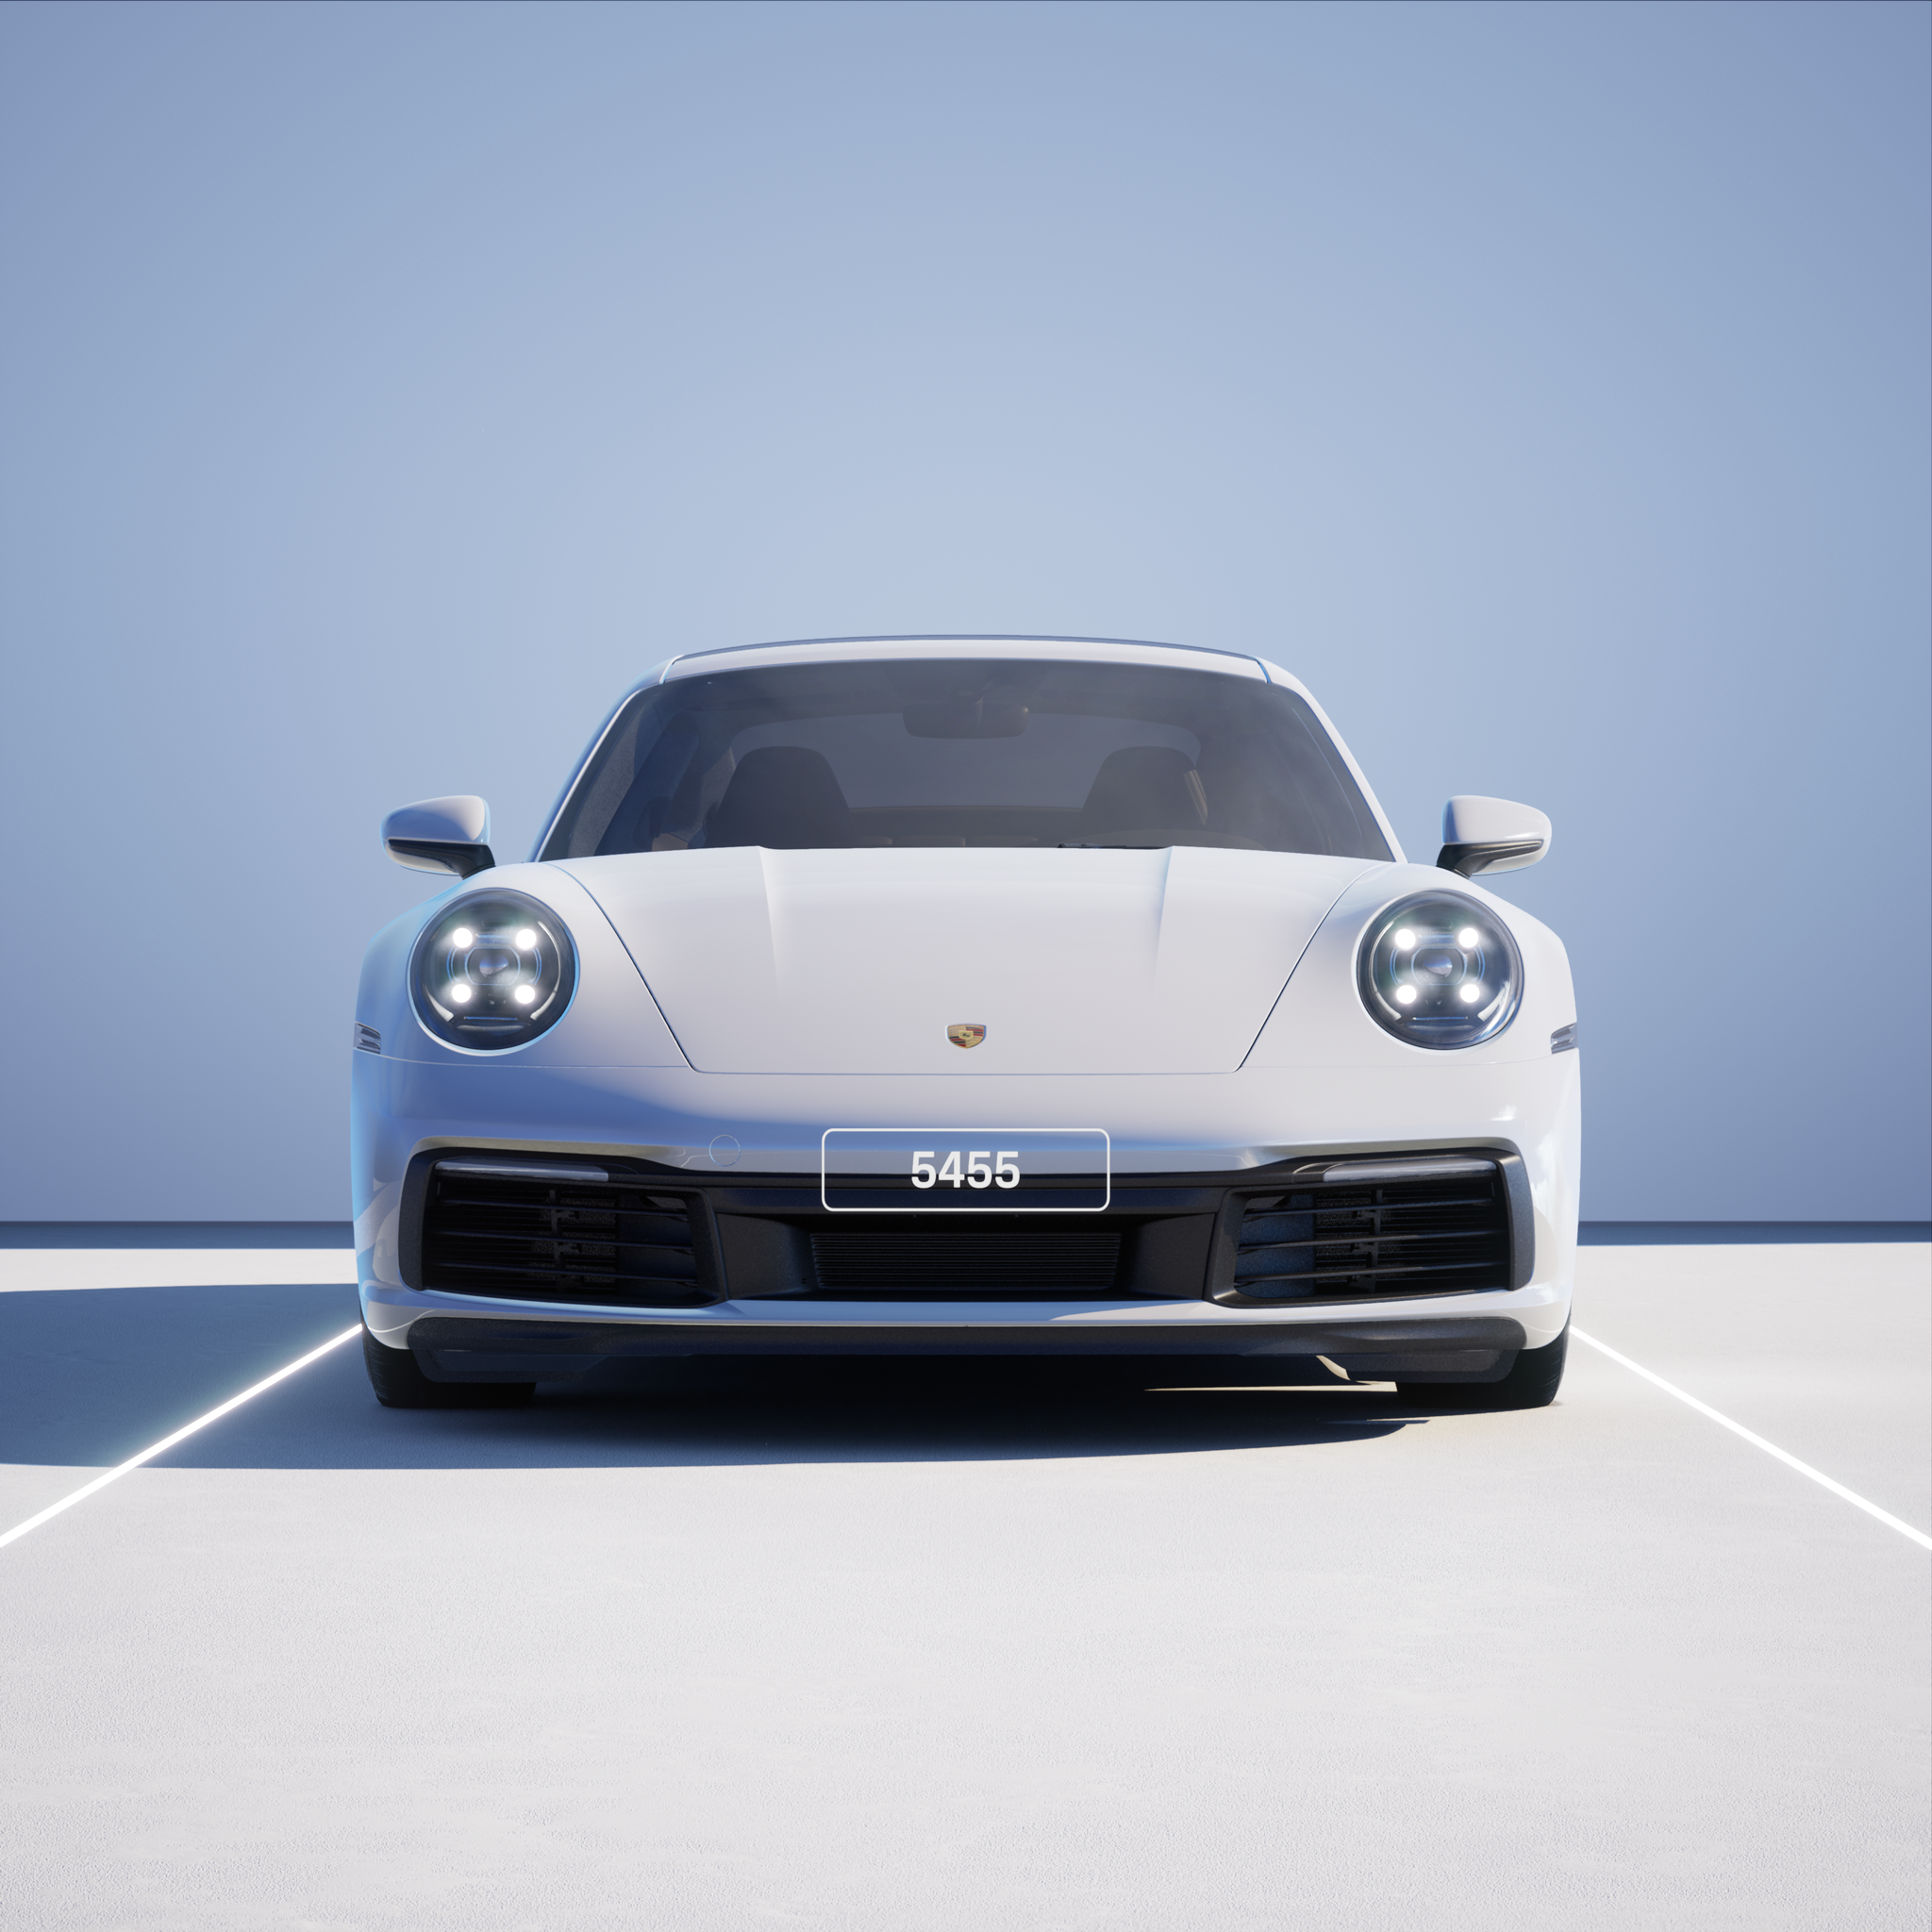 The PORSCHΞ 911 5455 image in phase